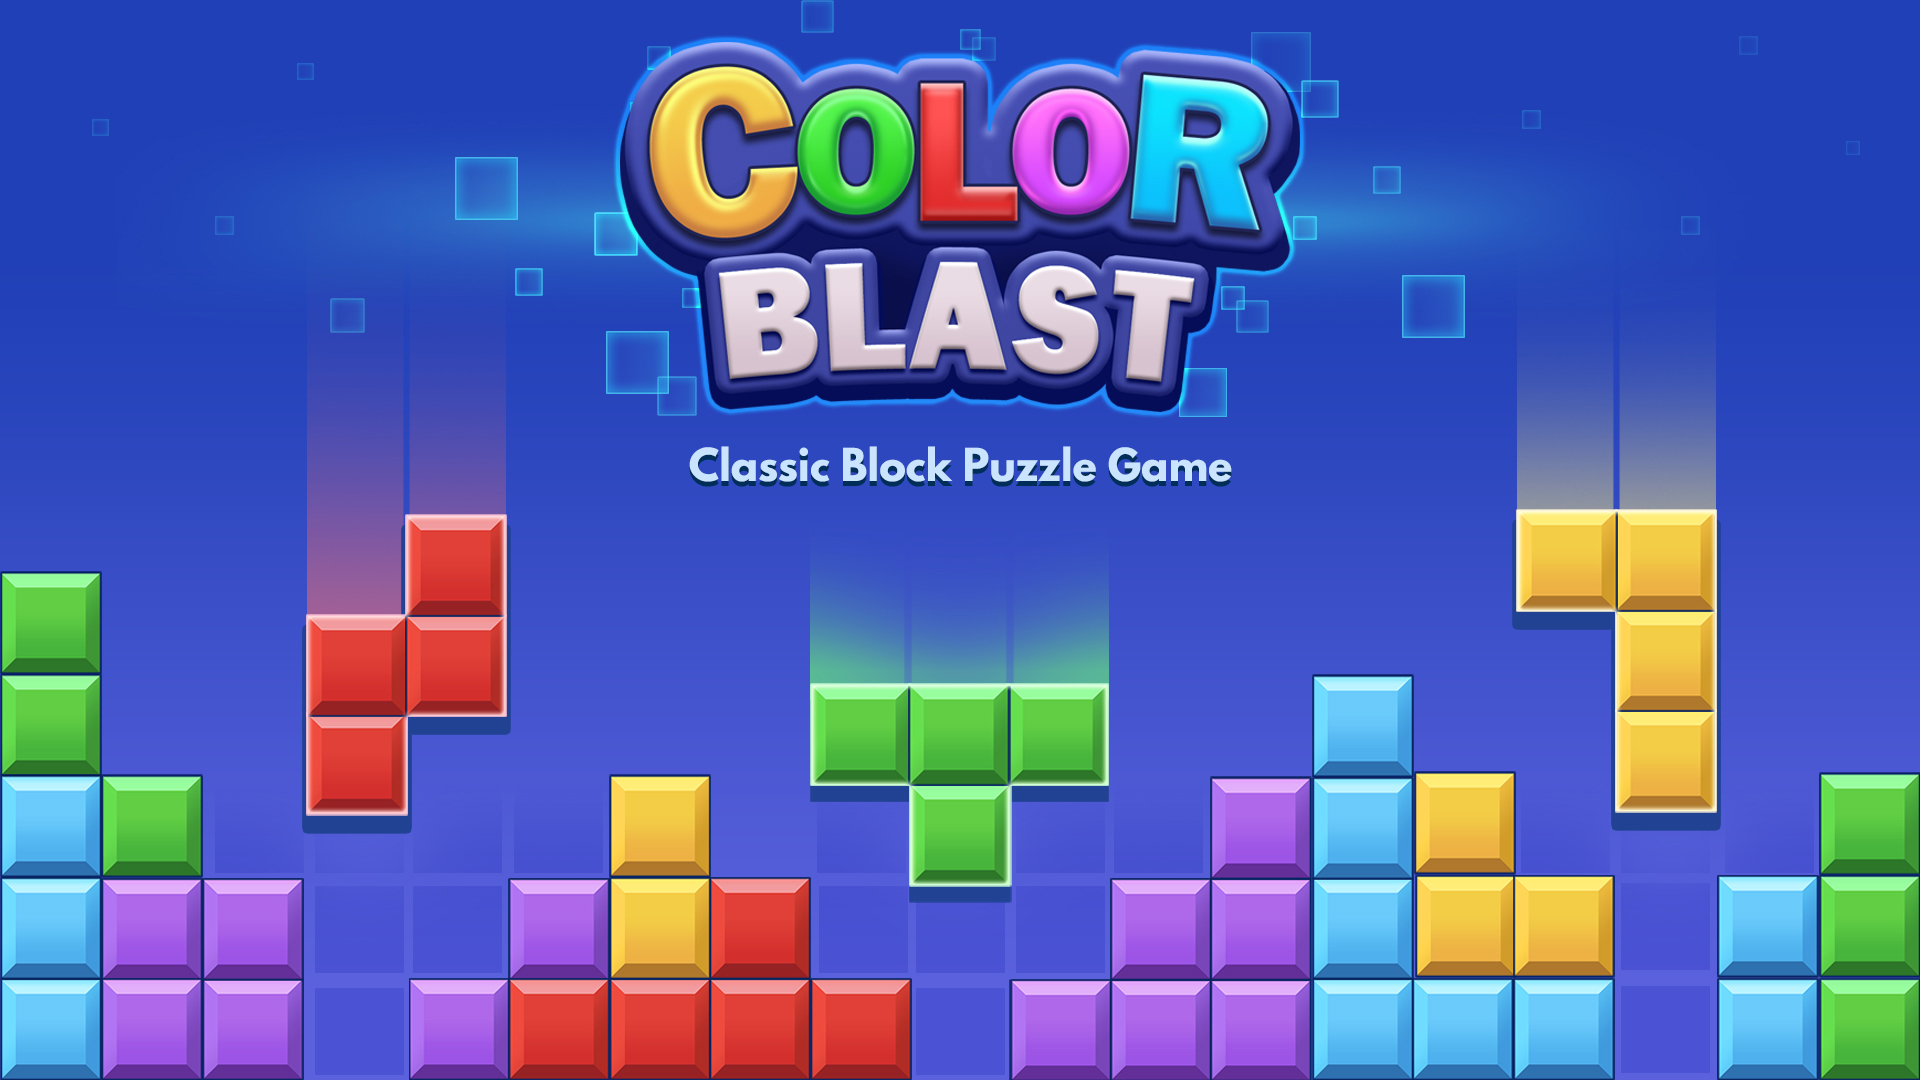 Play Block Smash - Block Puzzle Online for Free on PC & Mobile